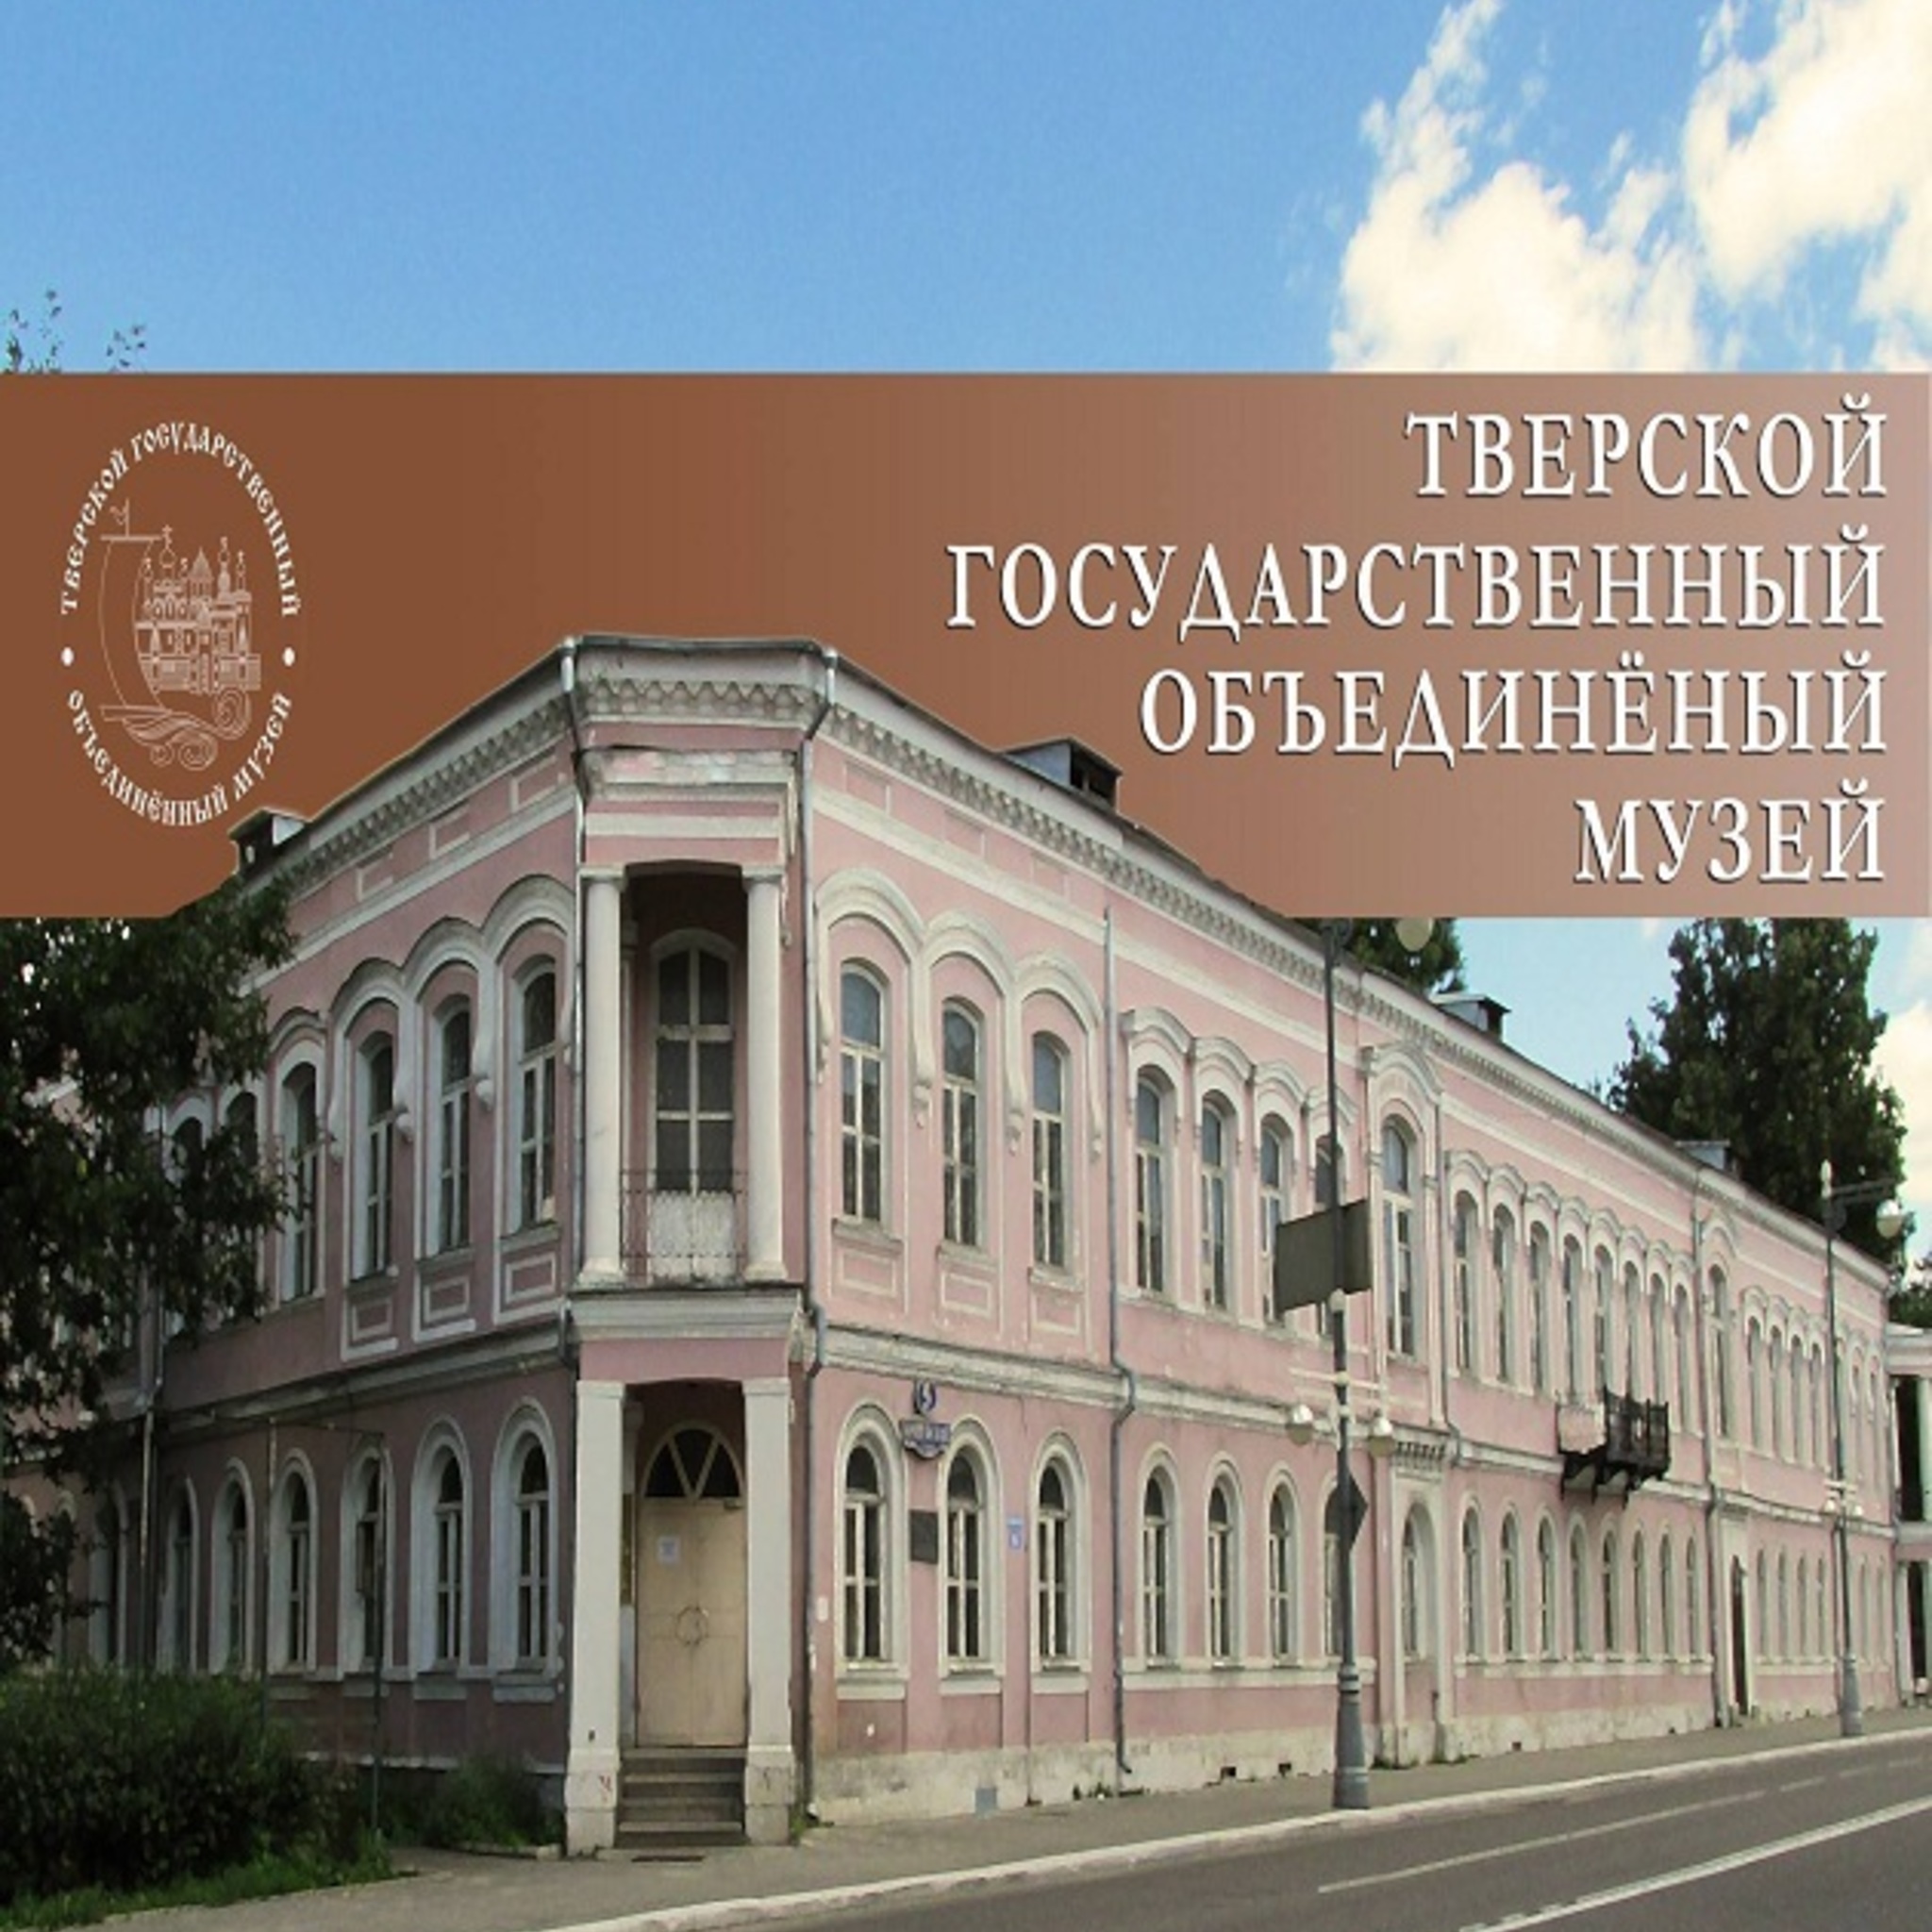 Seminar on Archeology Tver Land and Contiguous Territories in Antiquity